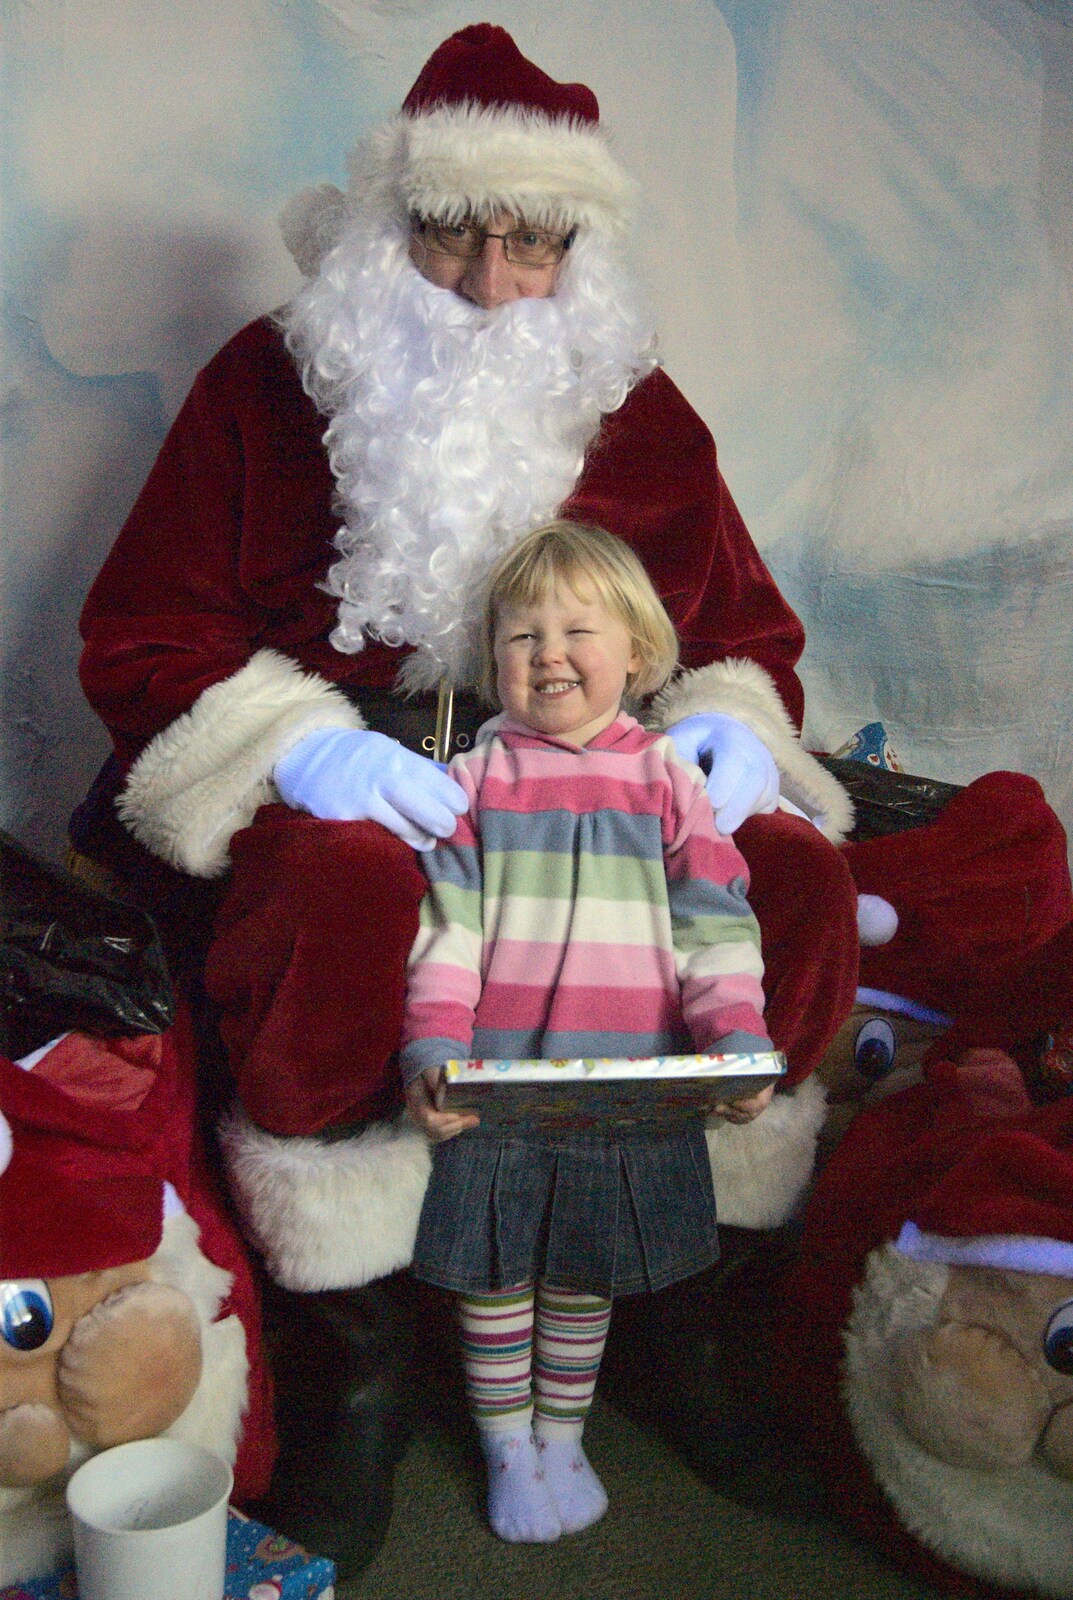 Giddy Liddy with Santa Claus from Sledging, A Trip to the Zoo, and Thrandeston Carols, Diss and Banham, Norfolk - 20th December 2010